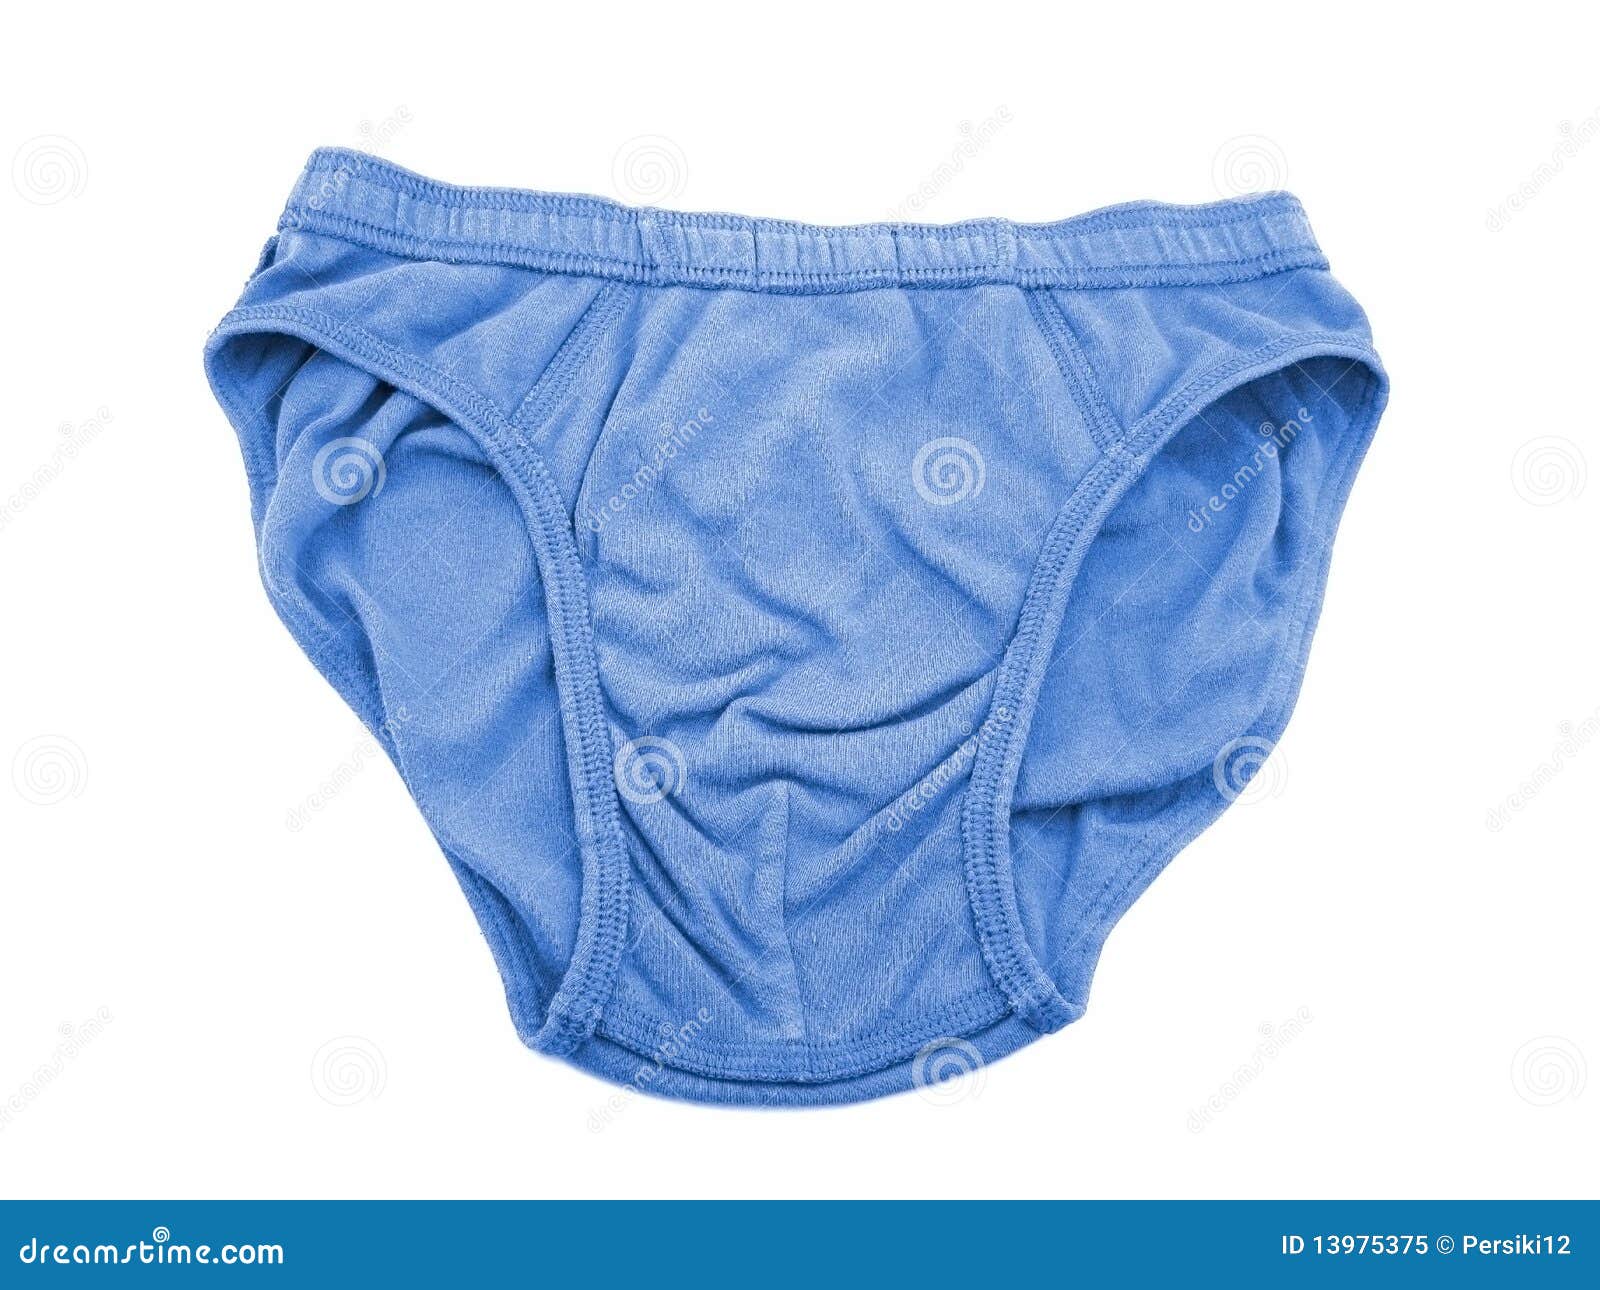 Underpants stock image. Image of clothes, clothing, horizontal - 13975375